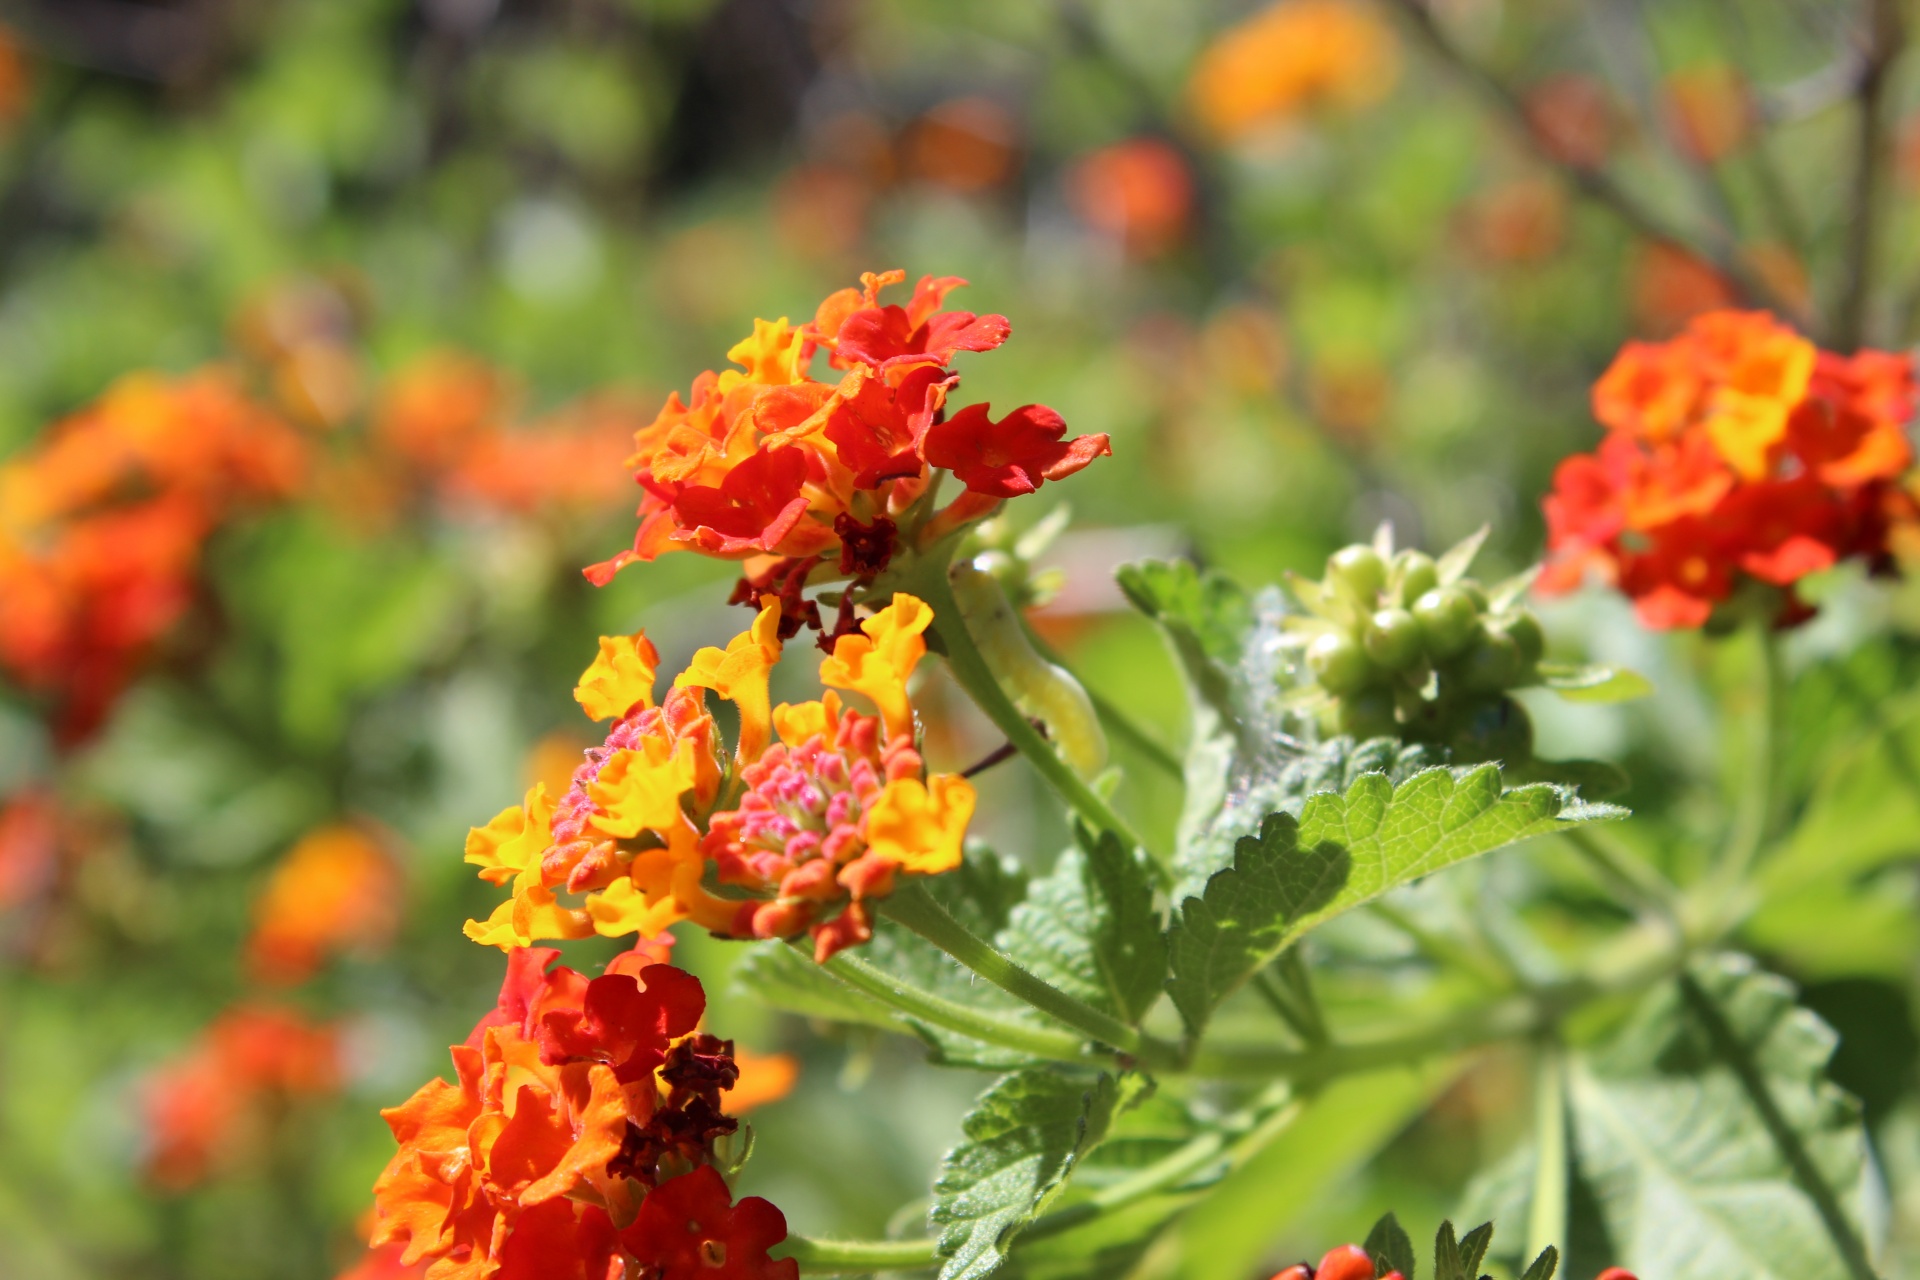 Texas in spring has many lovely flowers. Lantana is a popular bush with bright orange blossoms. If you look, you can see a little caterpillar-like sawfly larvae crawling up the stem.